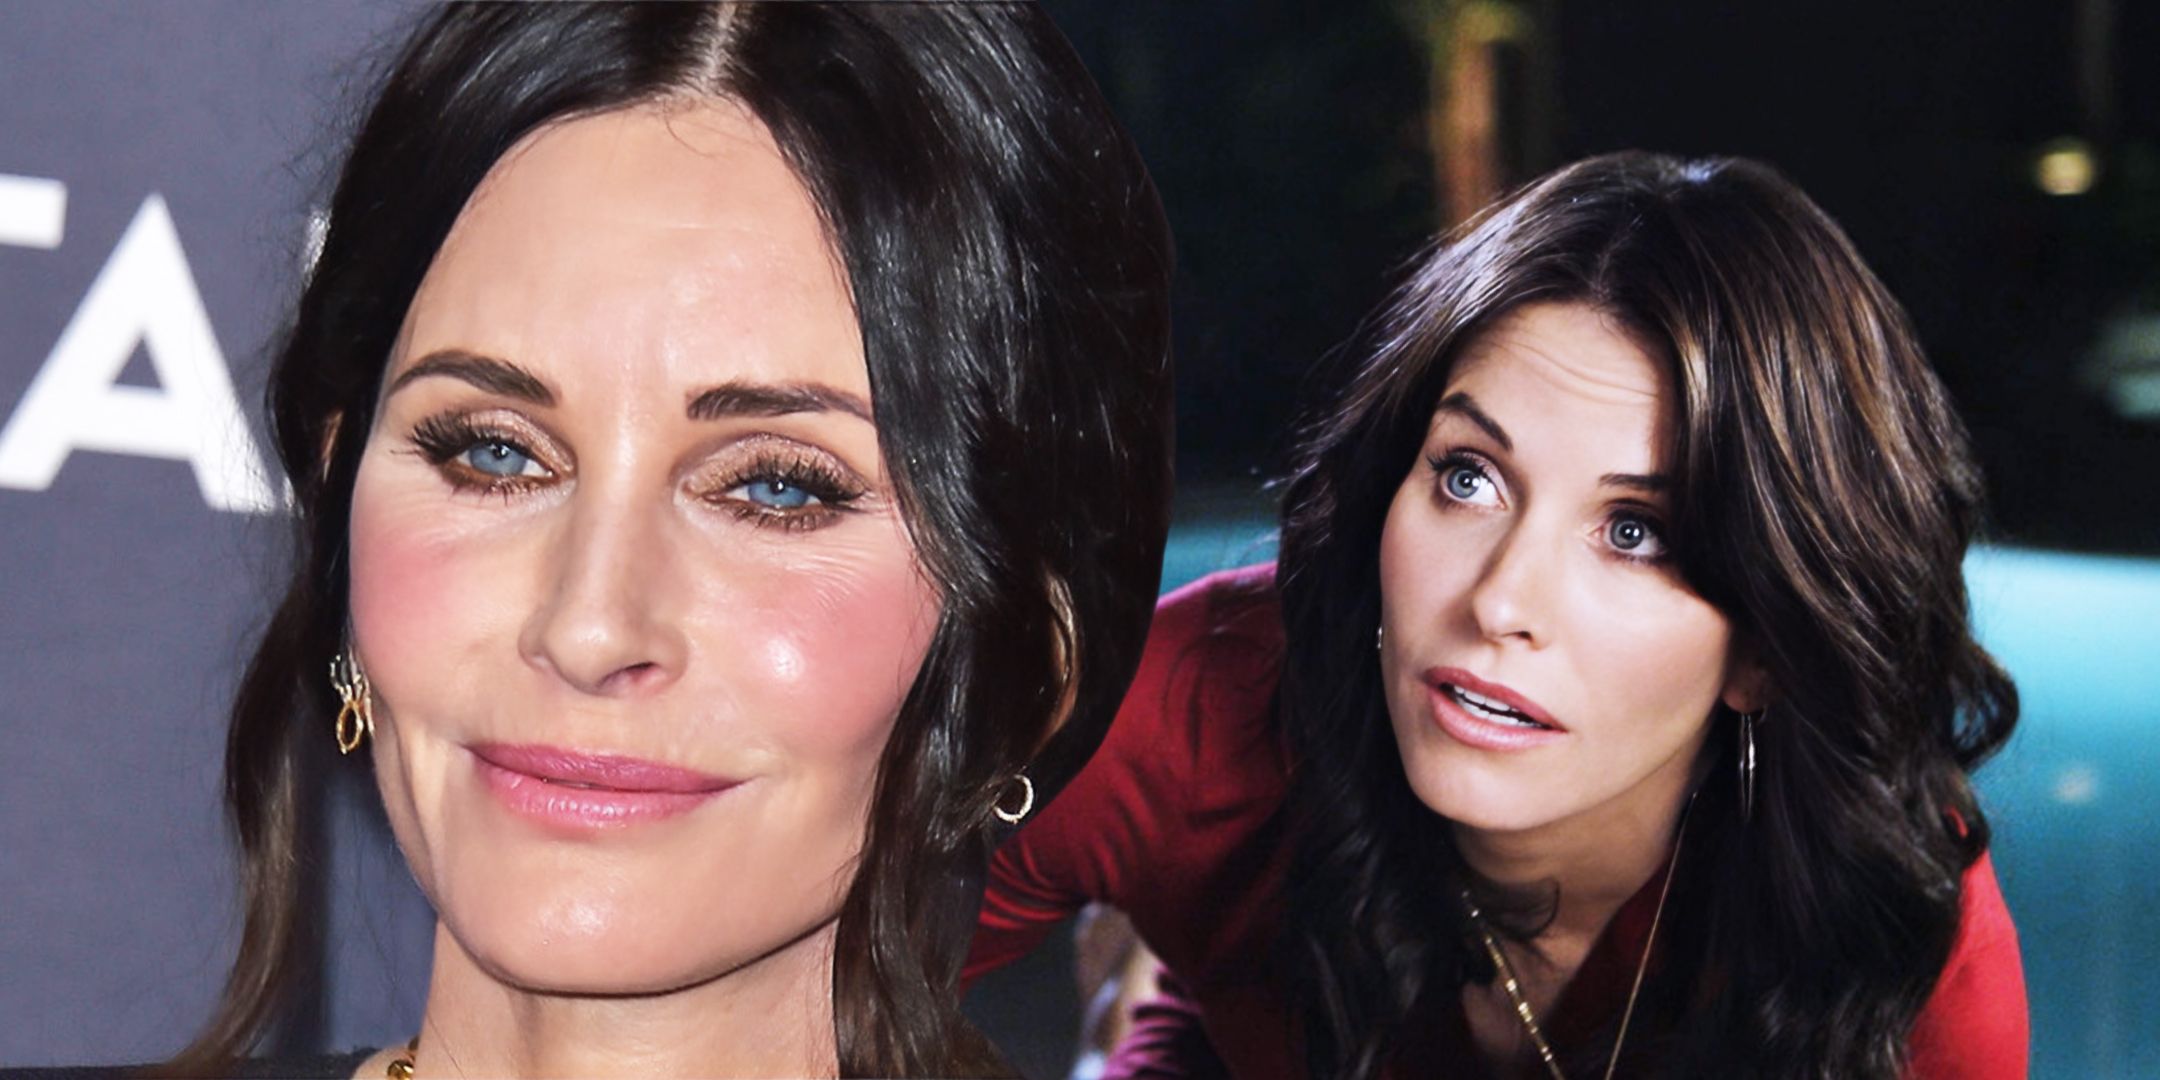 Courteney Cox as Monica Gellar before and after